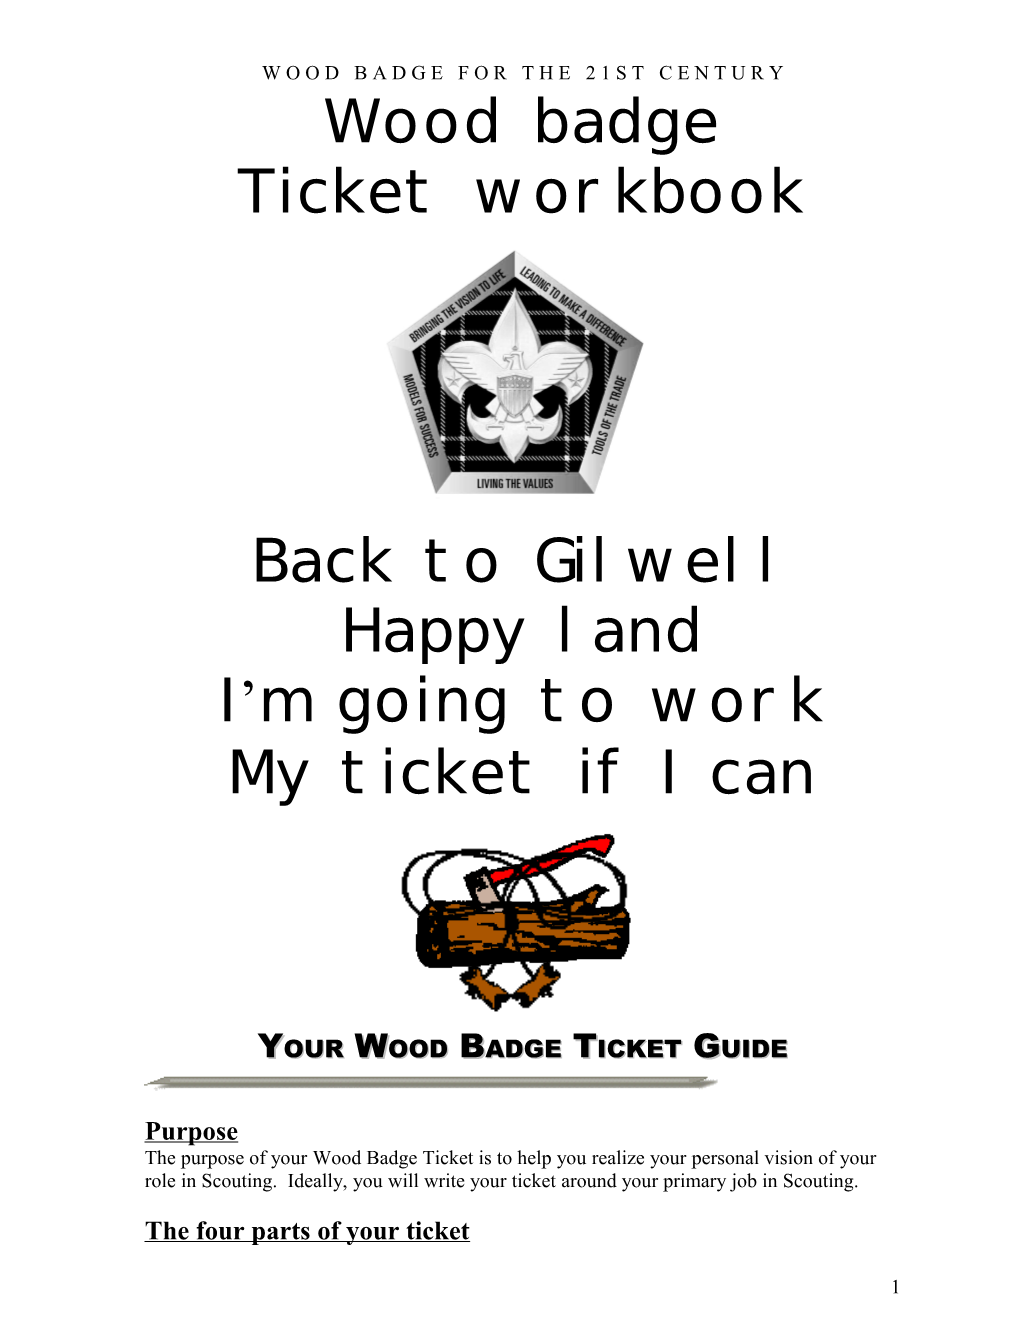 Your Wood Badge Ticket Guide